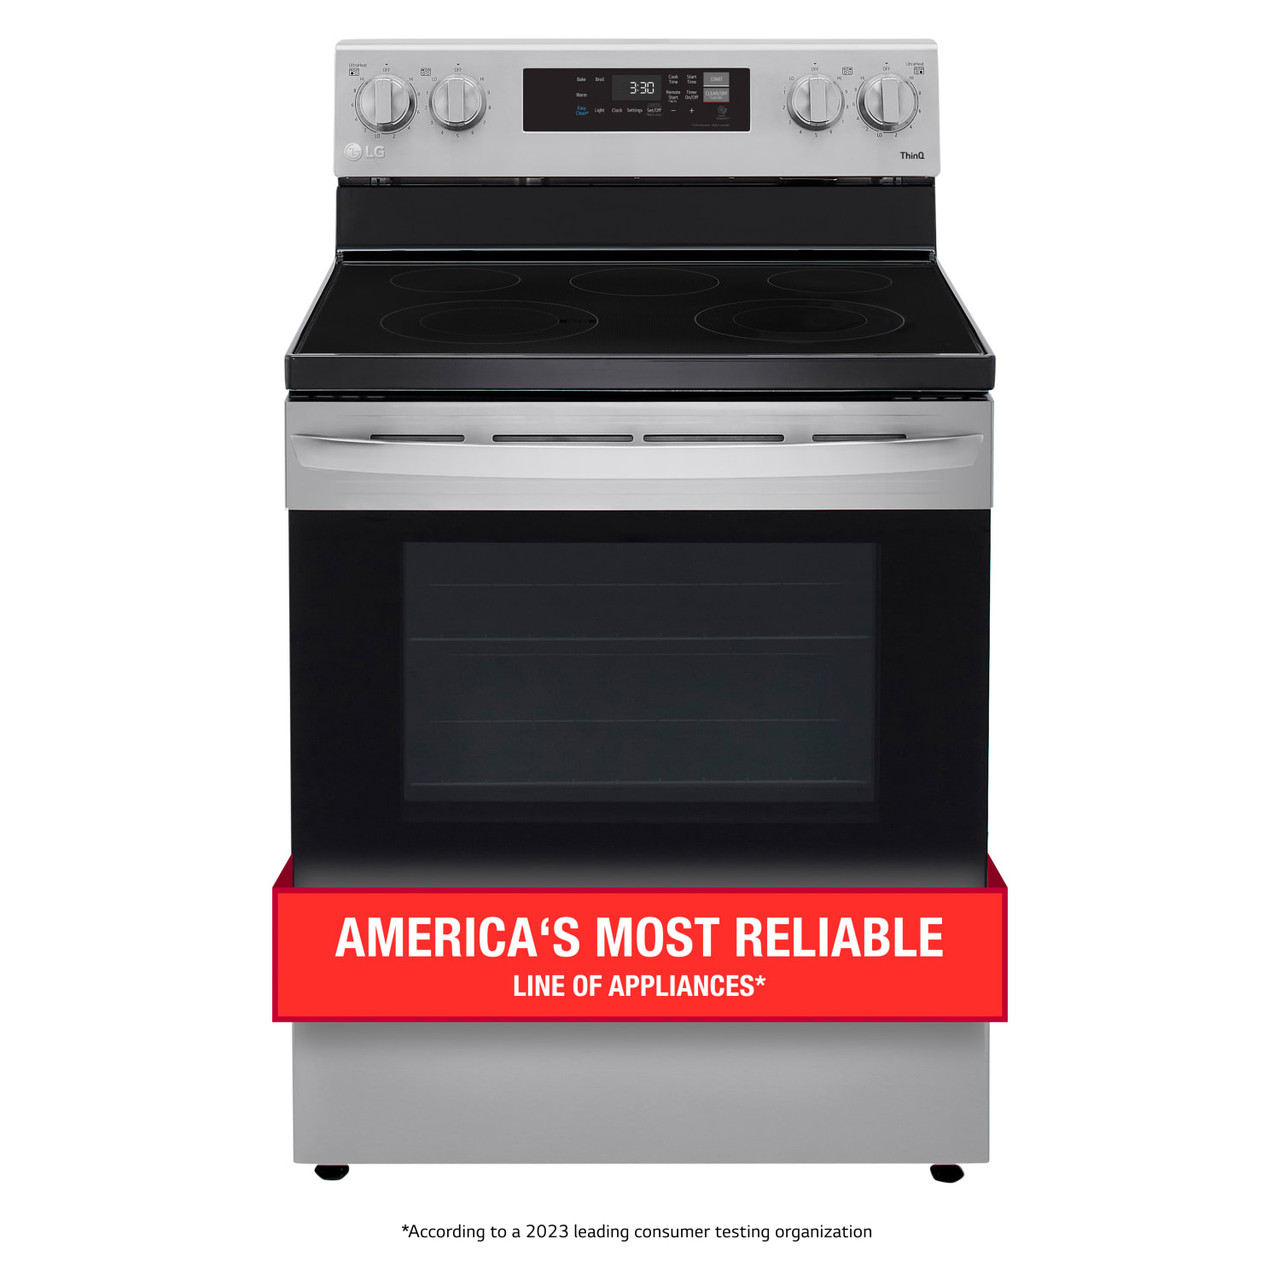 LG 6.3 cu. ft. Smart Wi-Fi Enabled Electric Range with EasyClean - LREL6321S